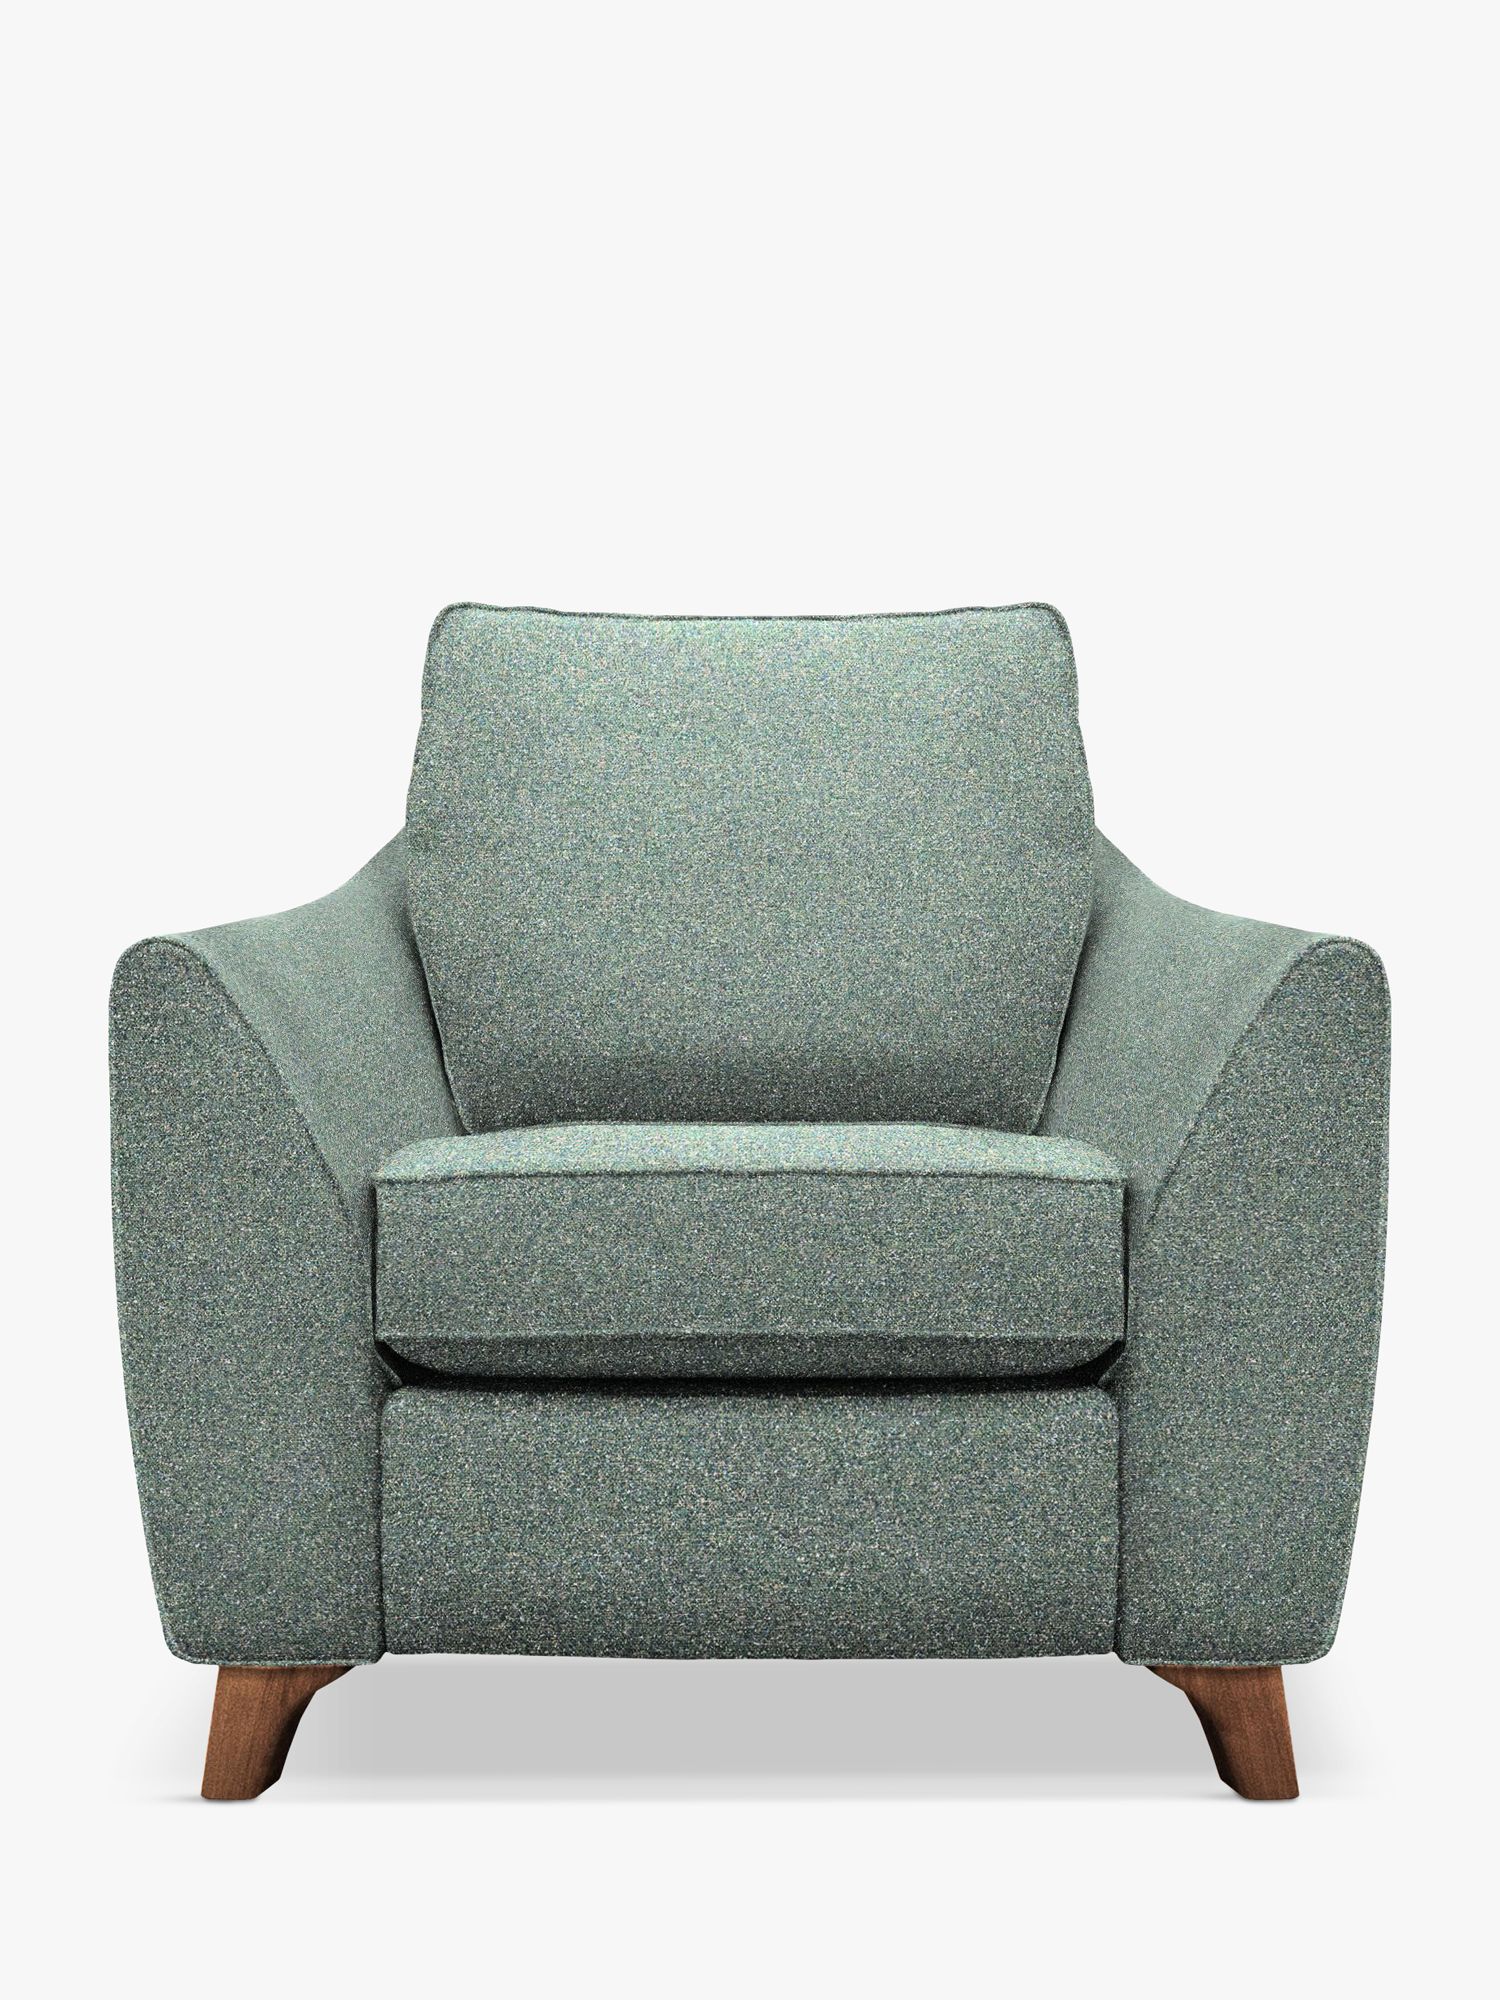 The Sixty Eight Range, G Plan Vintage The Sixty Eight Armchair, Tweed Seaglass